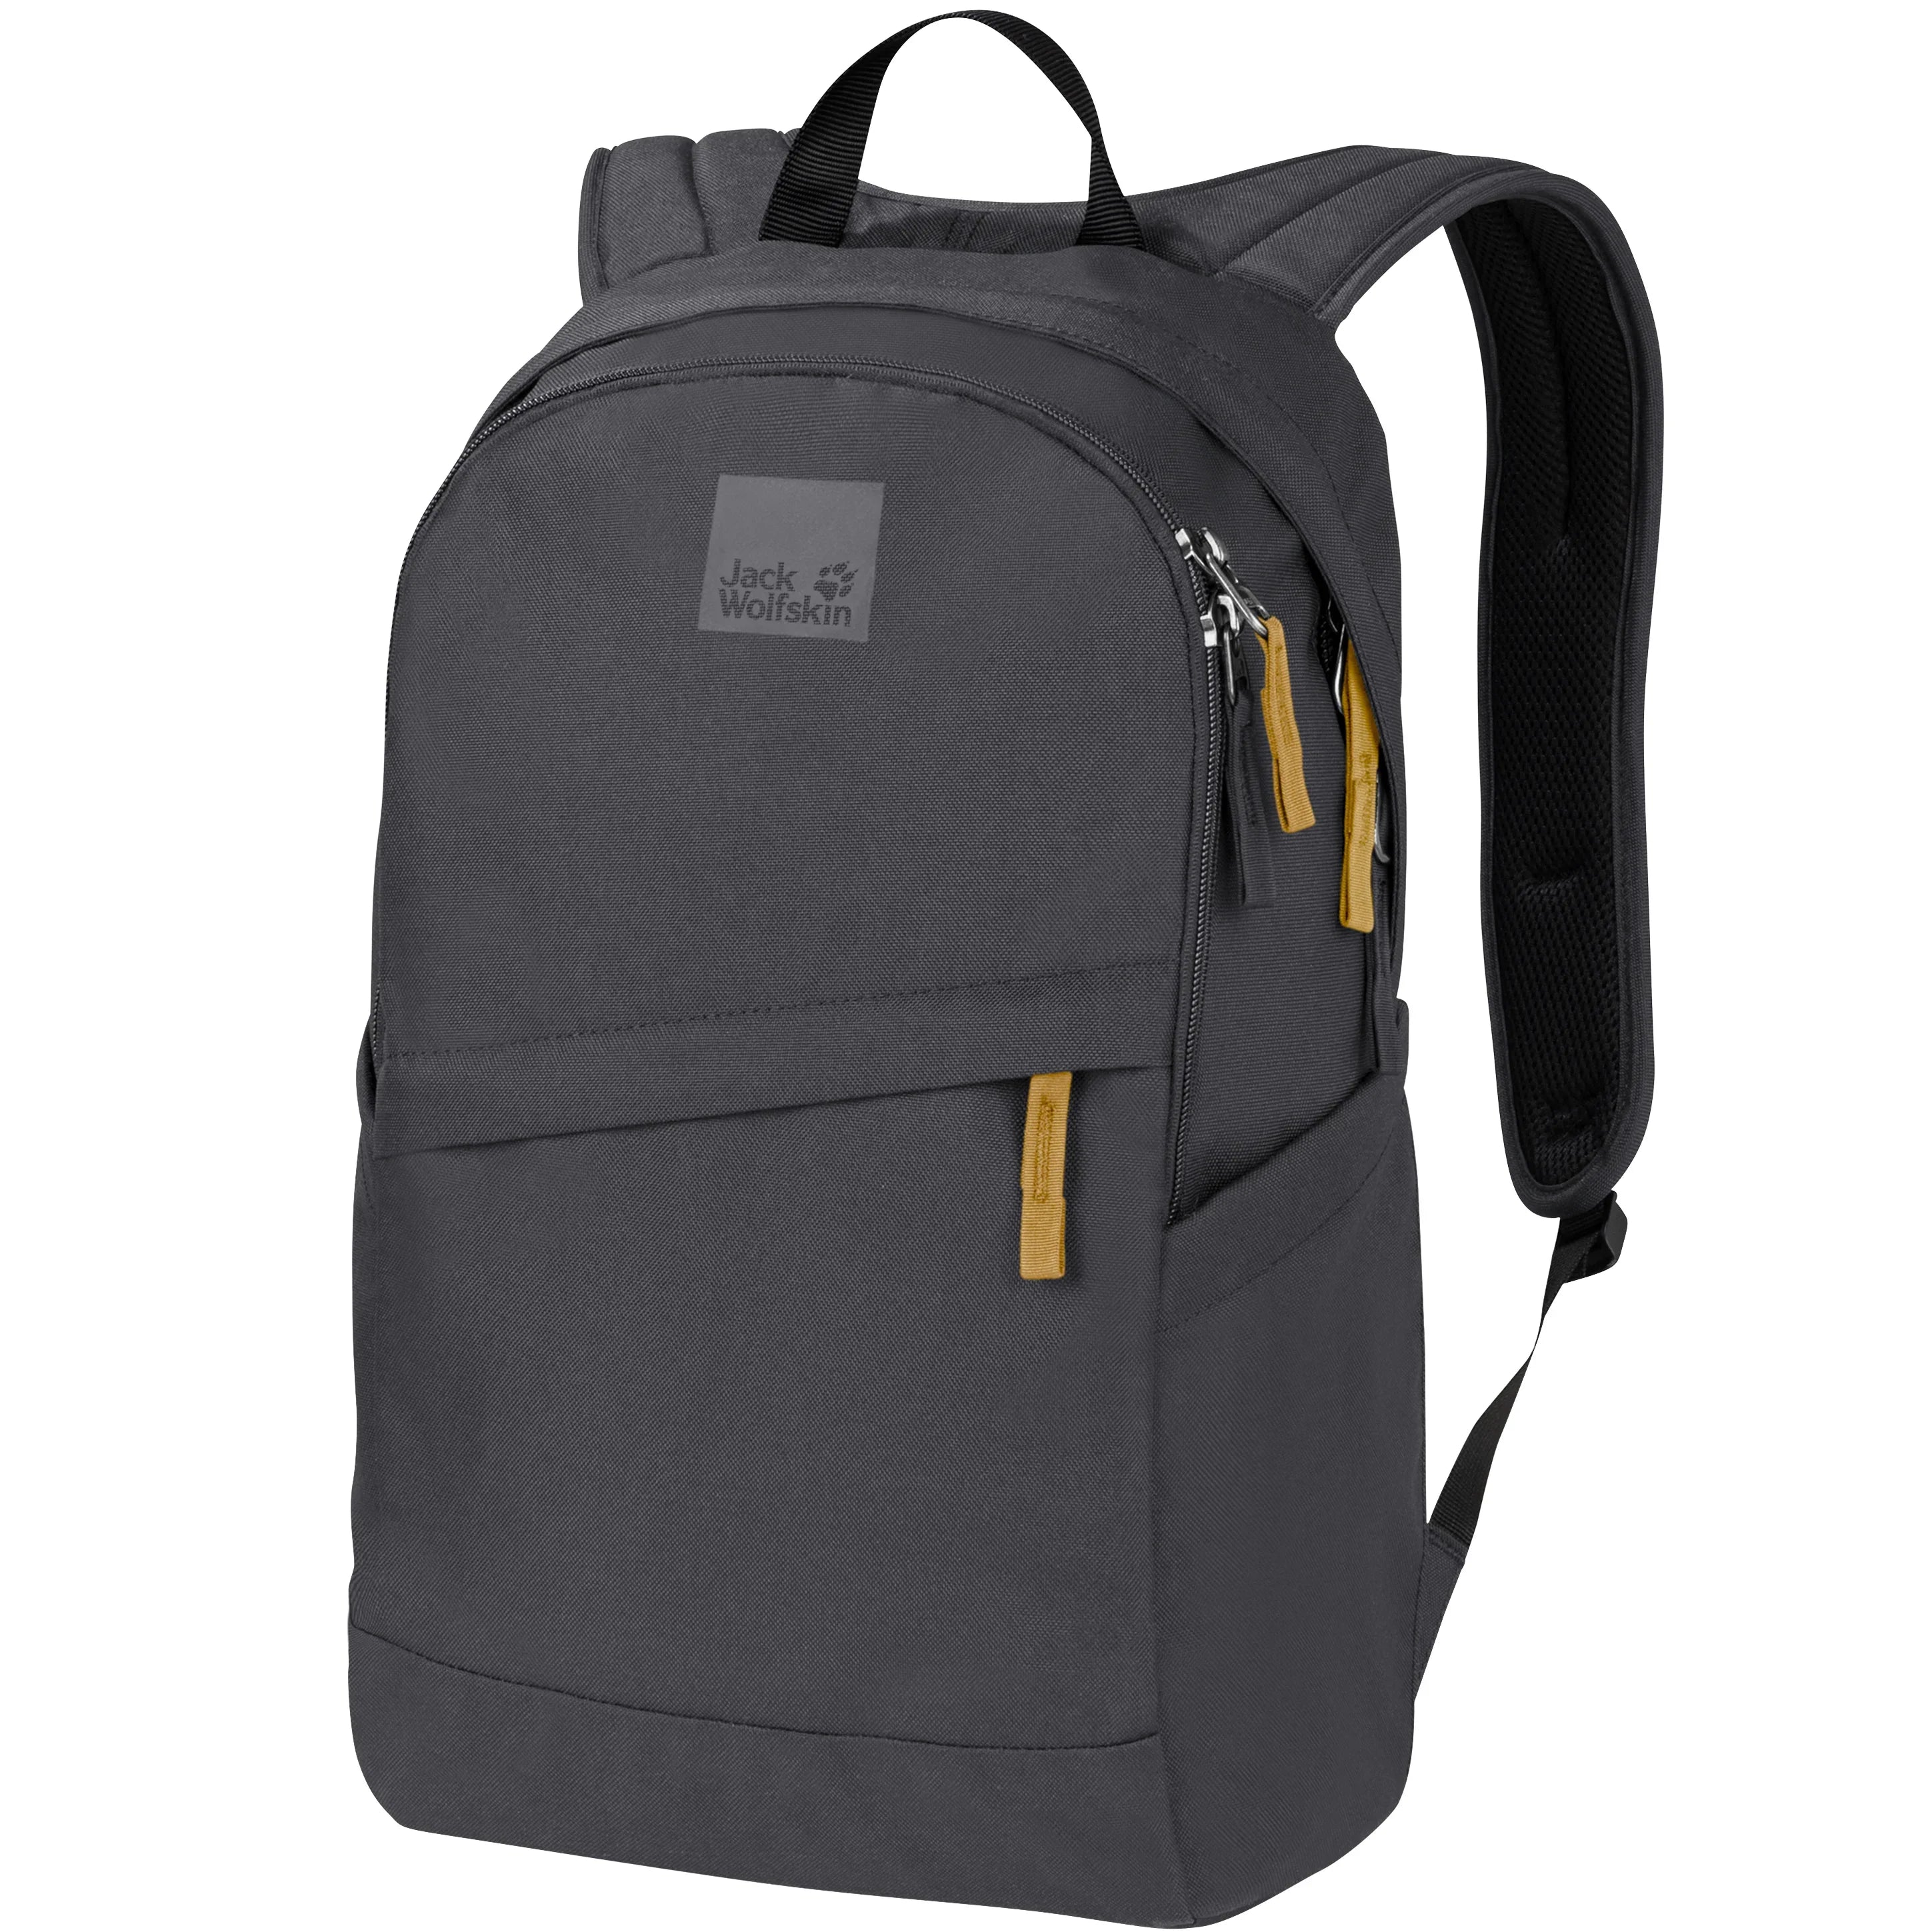 Jack Wolfskin - perfect for everyday companions and daypacks bags life & travel